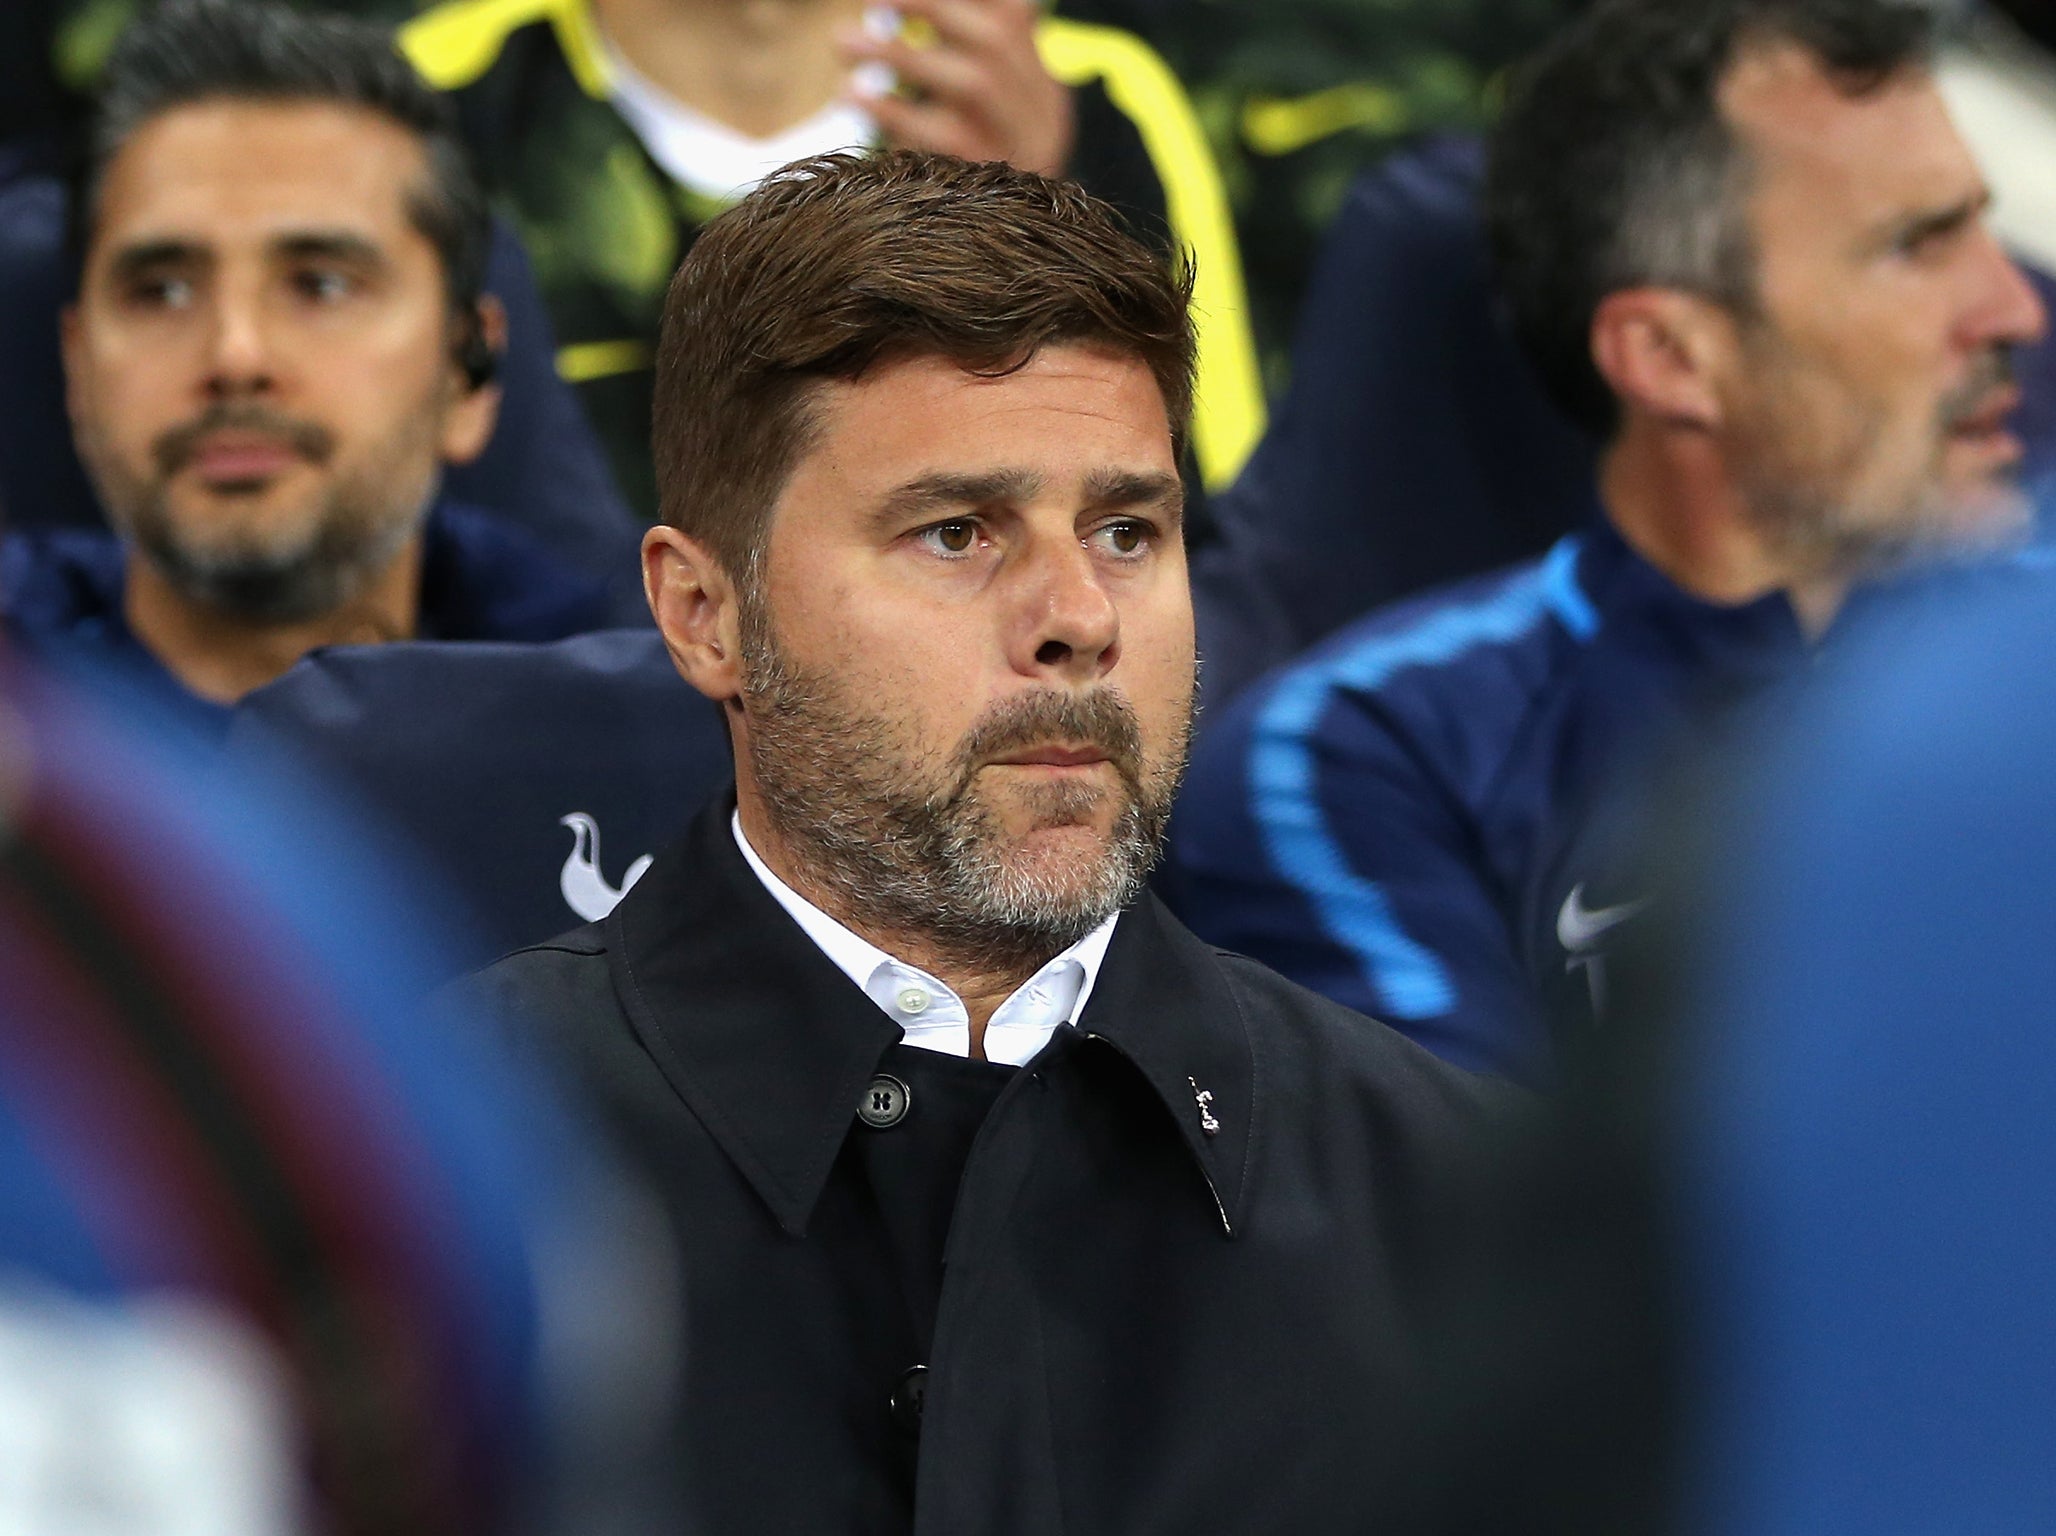 Pochettino admitted this game equated to a 'cup final'